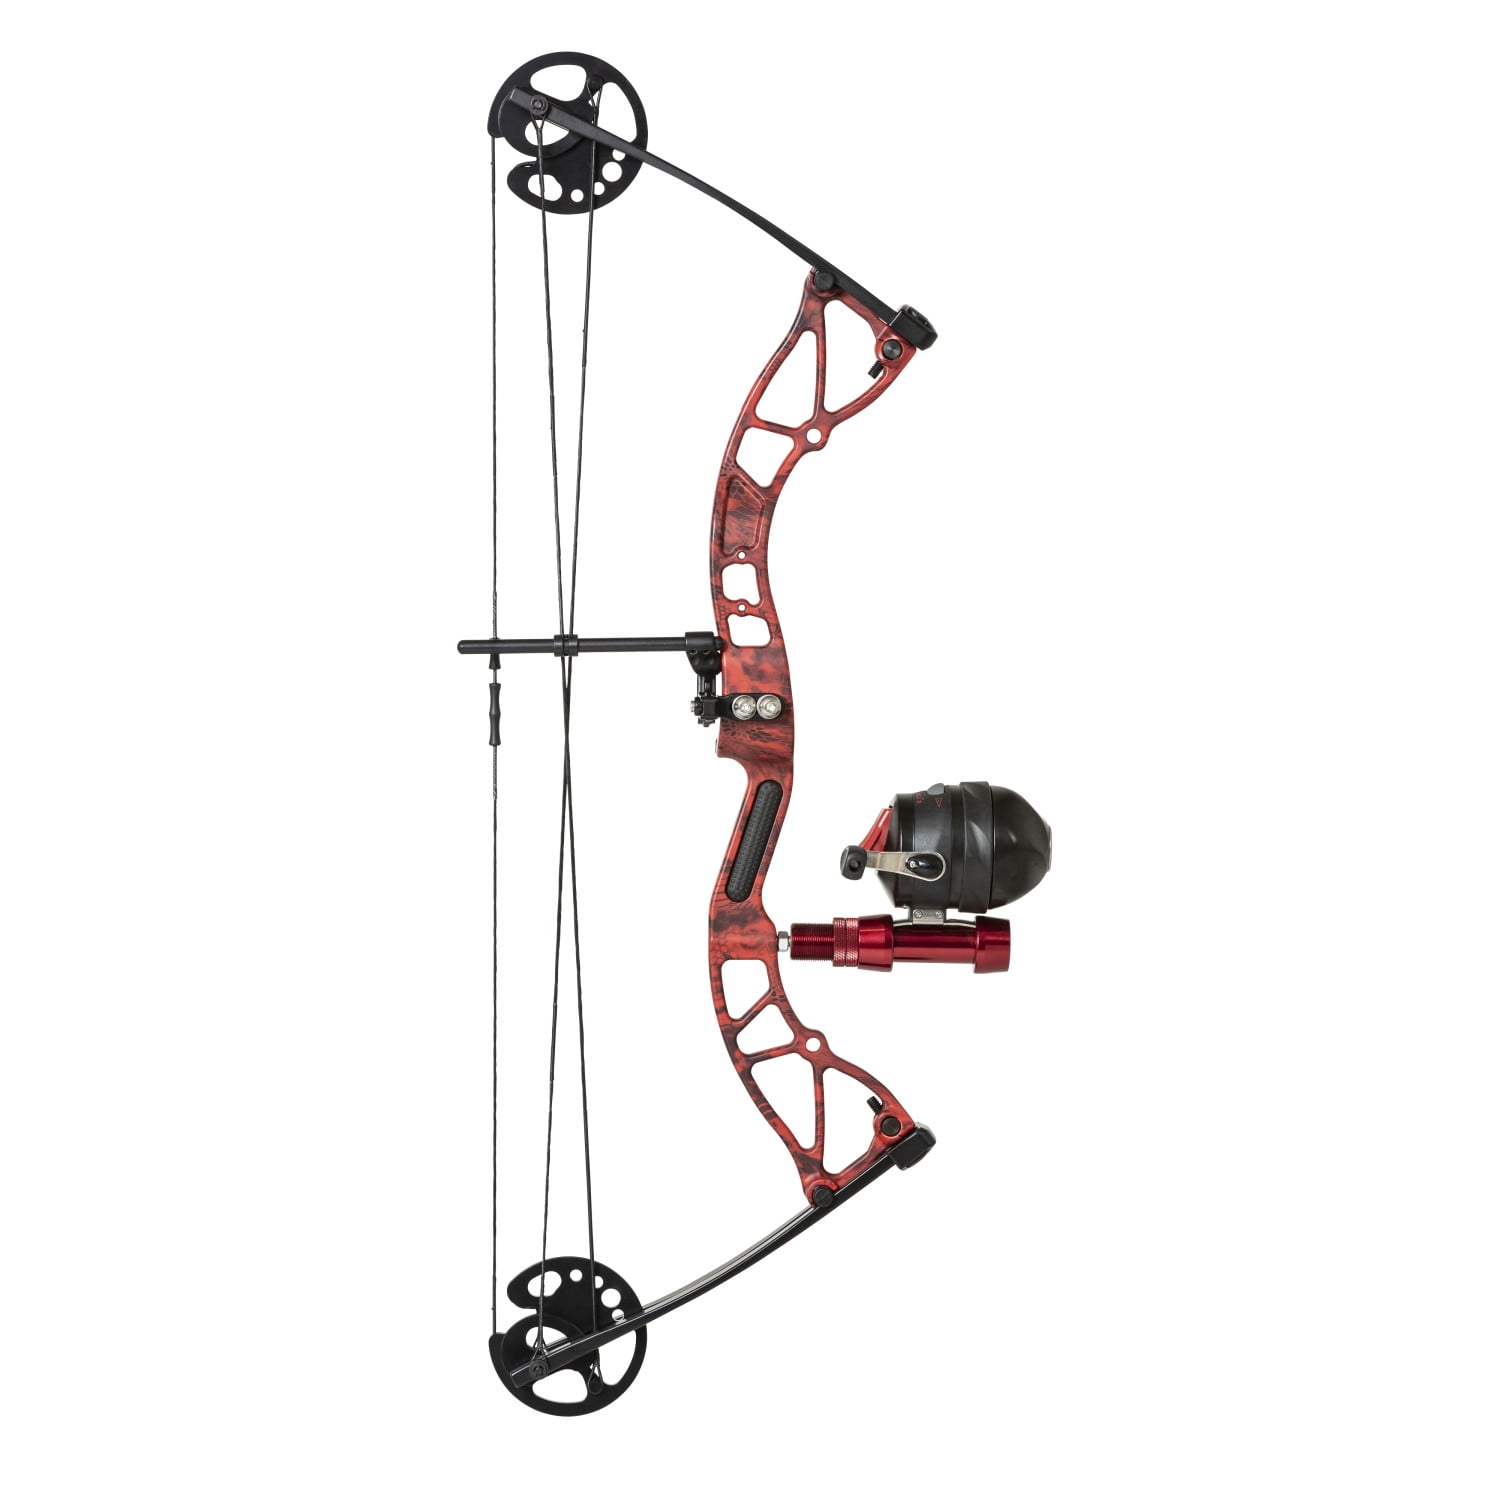 Cajun Bowfishing Shore Runner Compound Bowfishing Bow Ready to Fish Kit  with Arrow Rest, Bowfishing Reel, Reel Seat, Blister Buster Finger Pads, Fiberglass  Arrow 